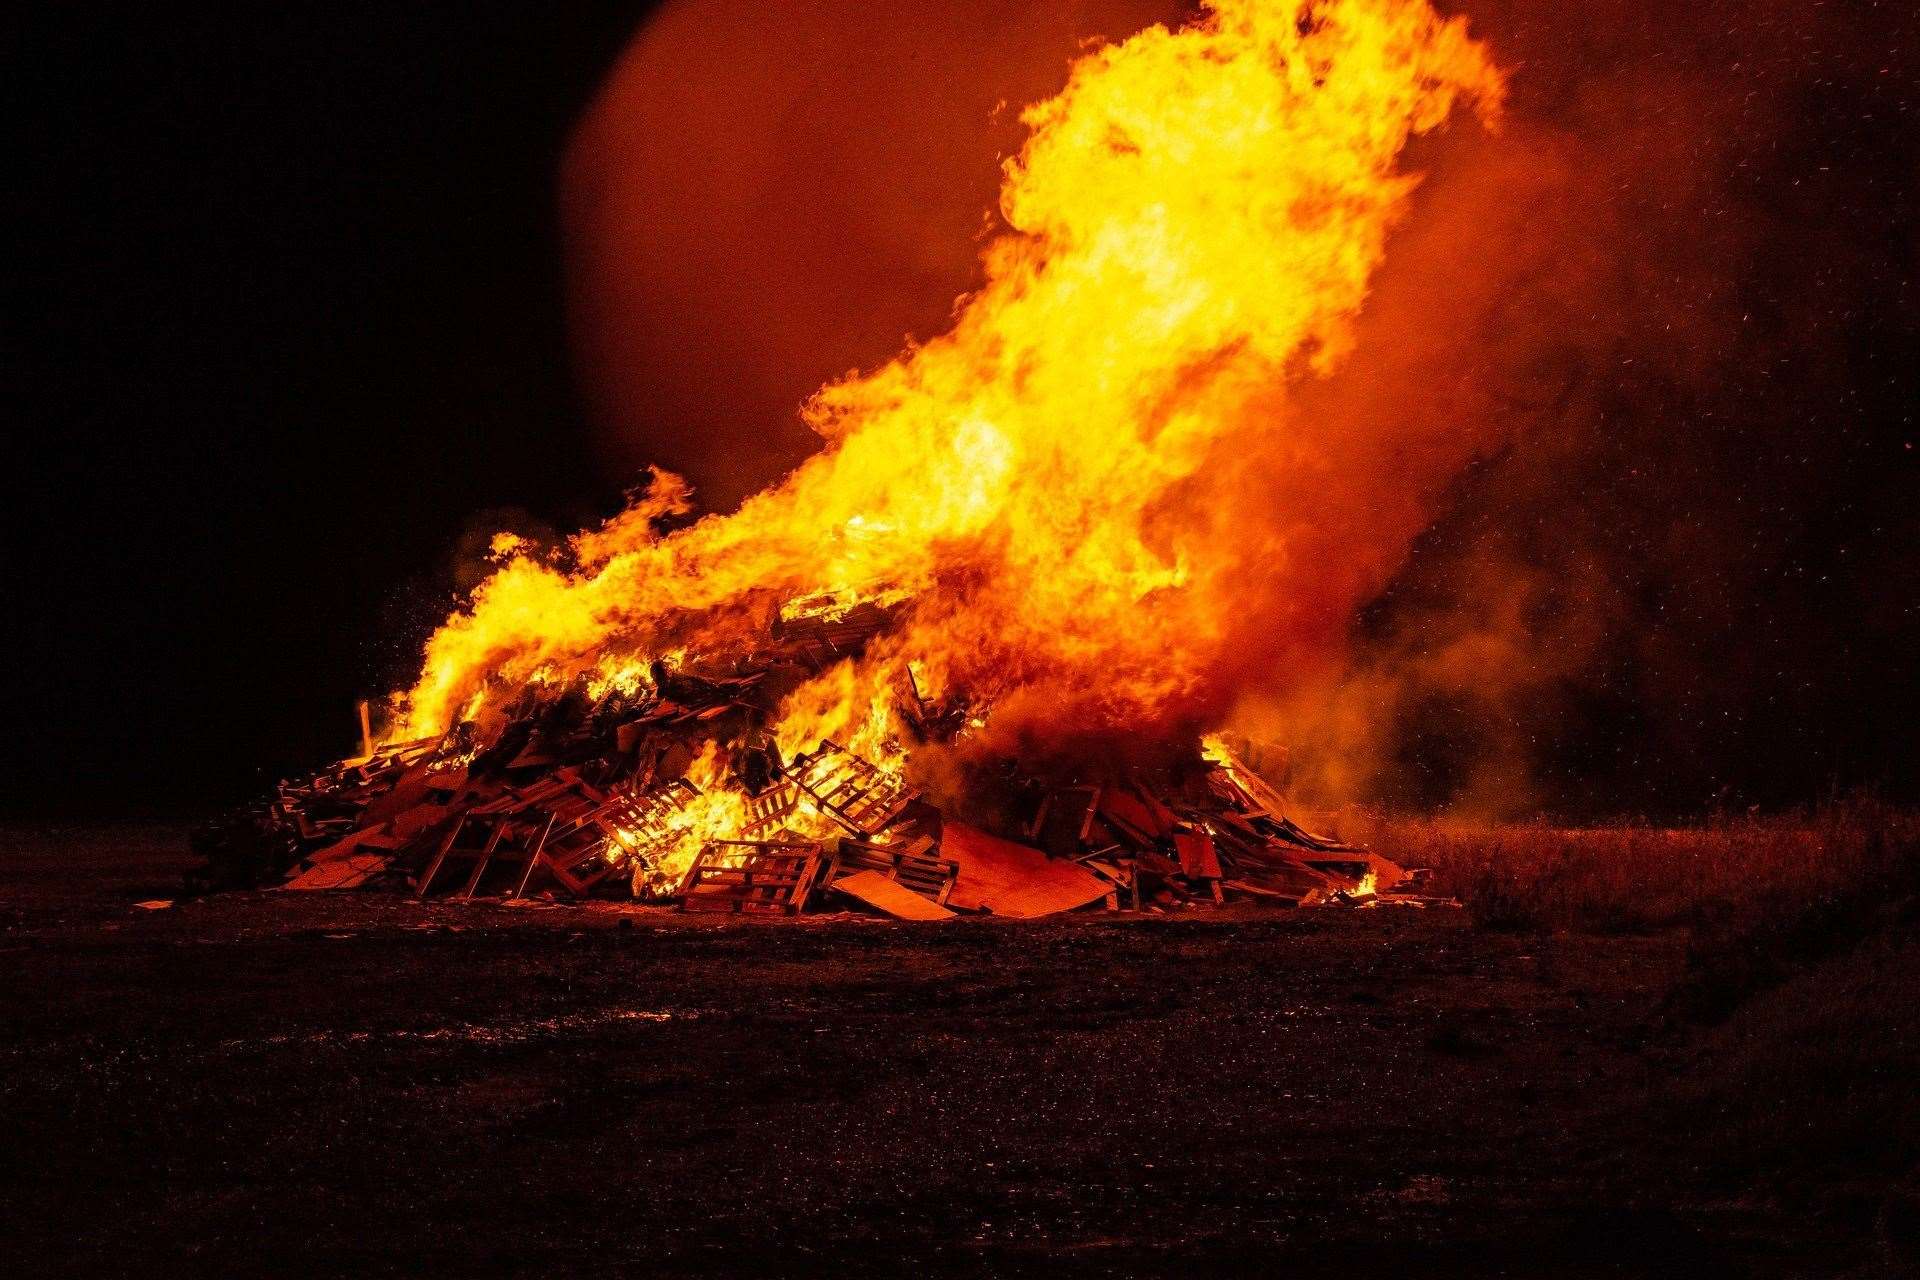 People lit bonfires around London to celebrate the plot's failure - a tradition that has continued for over 400 years